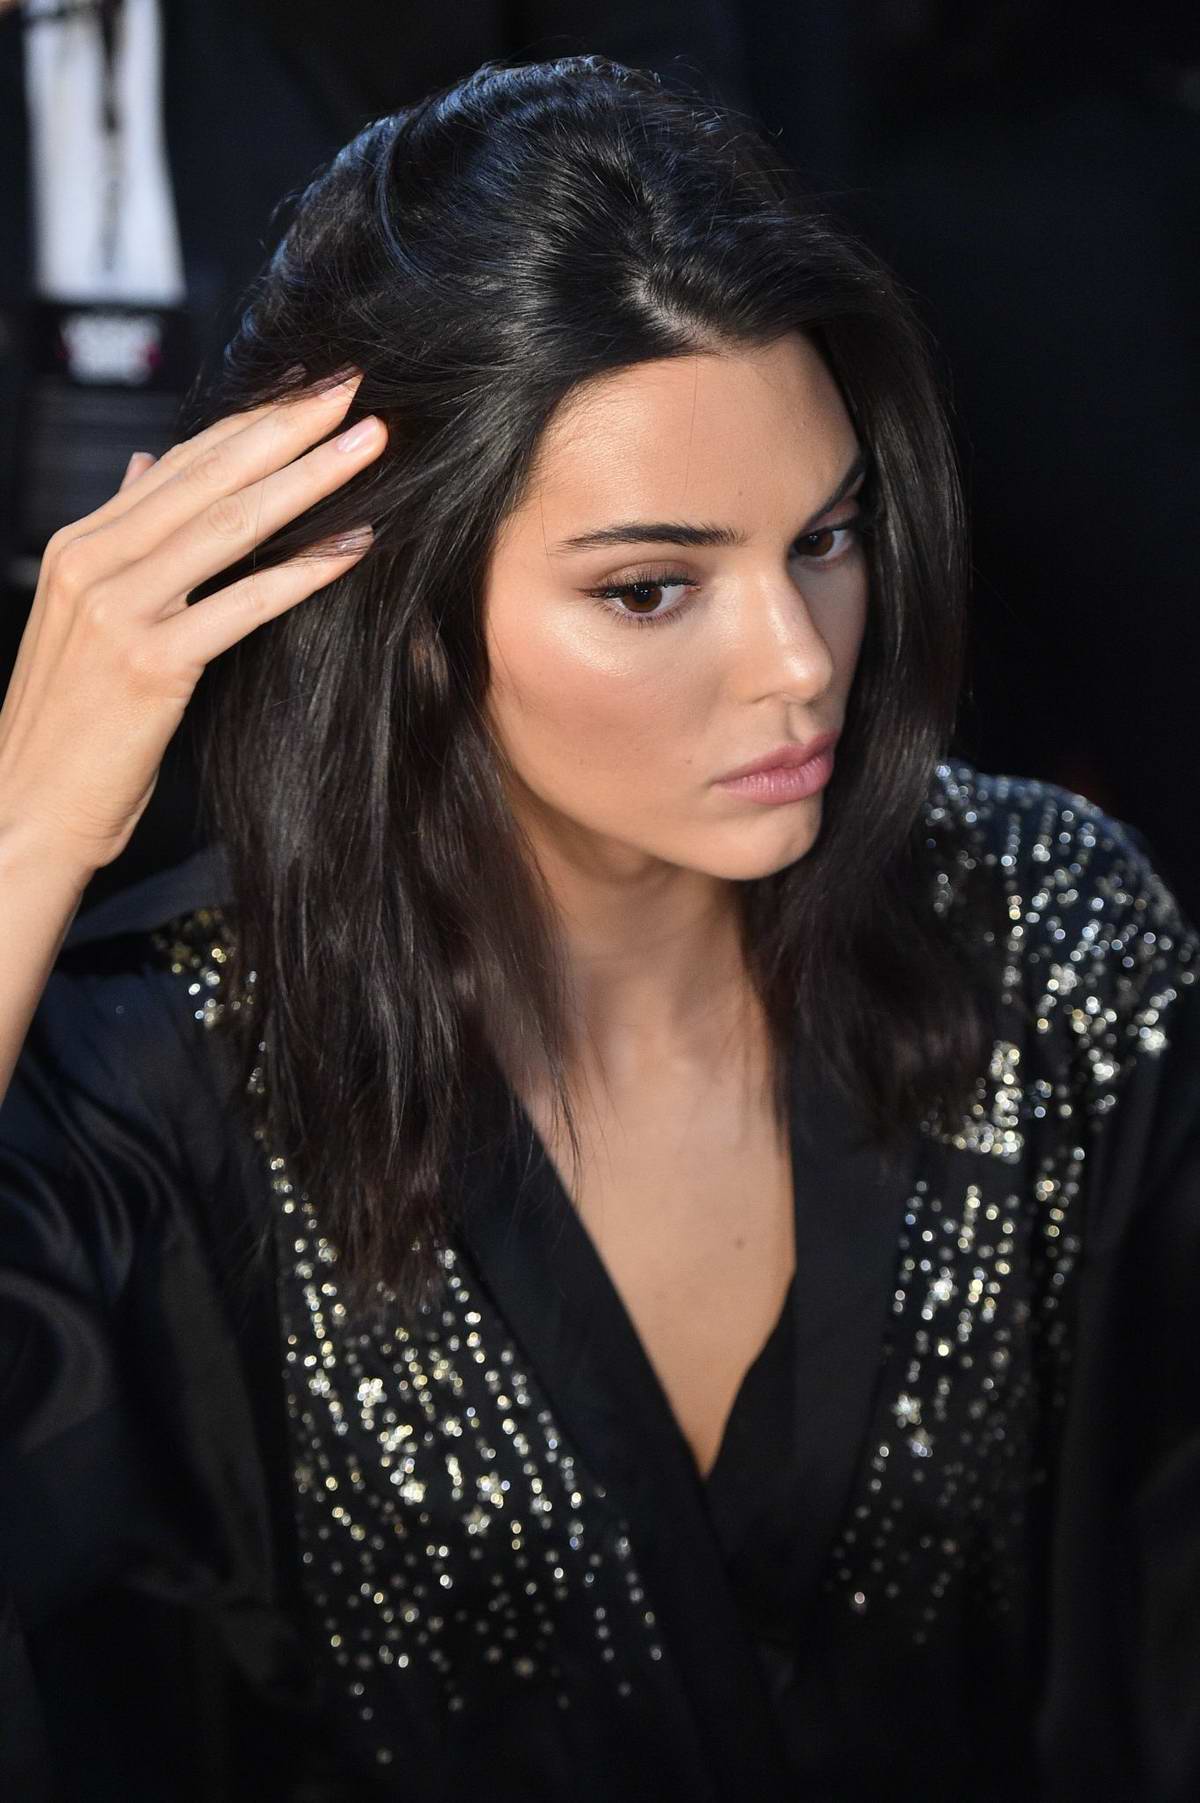 Kendall Jenner Backstage at the Victoria's Secret Fashion Show